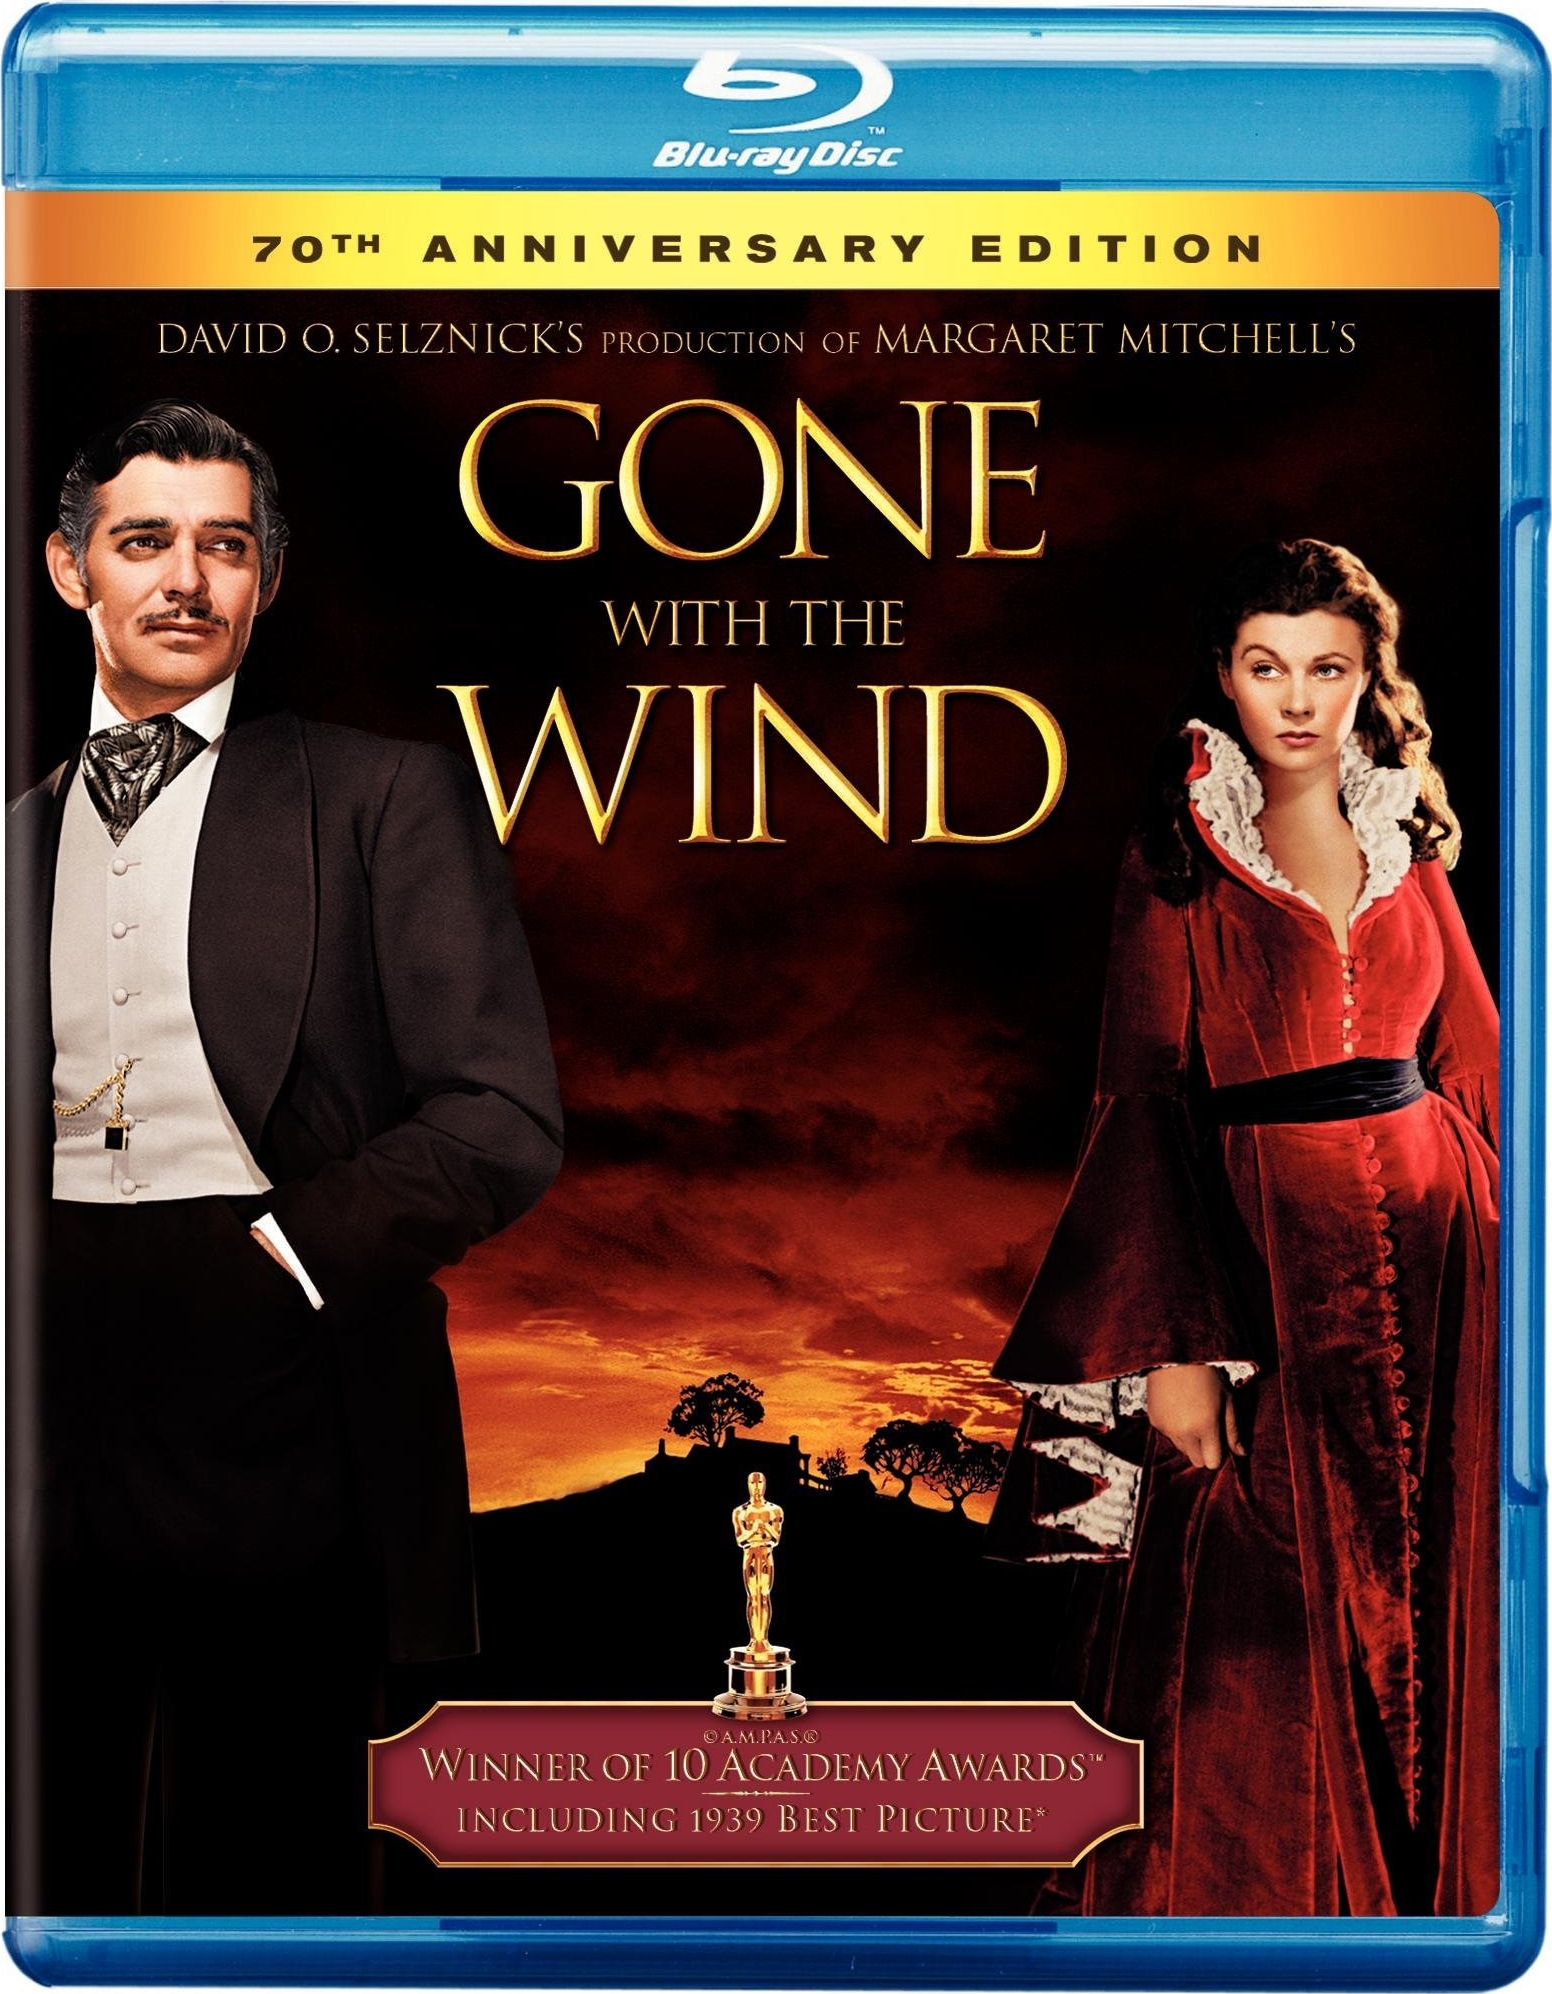 Gone with the Wind (1939) Lo Que El Viento Se Llevó (1939) [AC3 1.0 + SUP/SRT] [Blu Ray-Rip] 8473_front